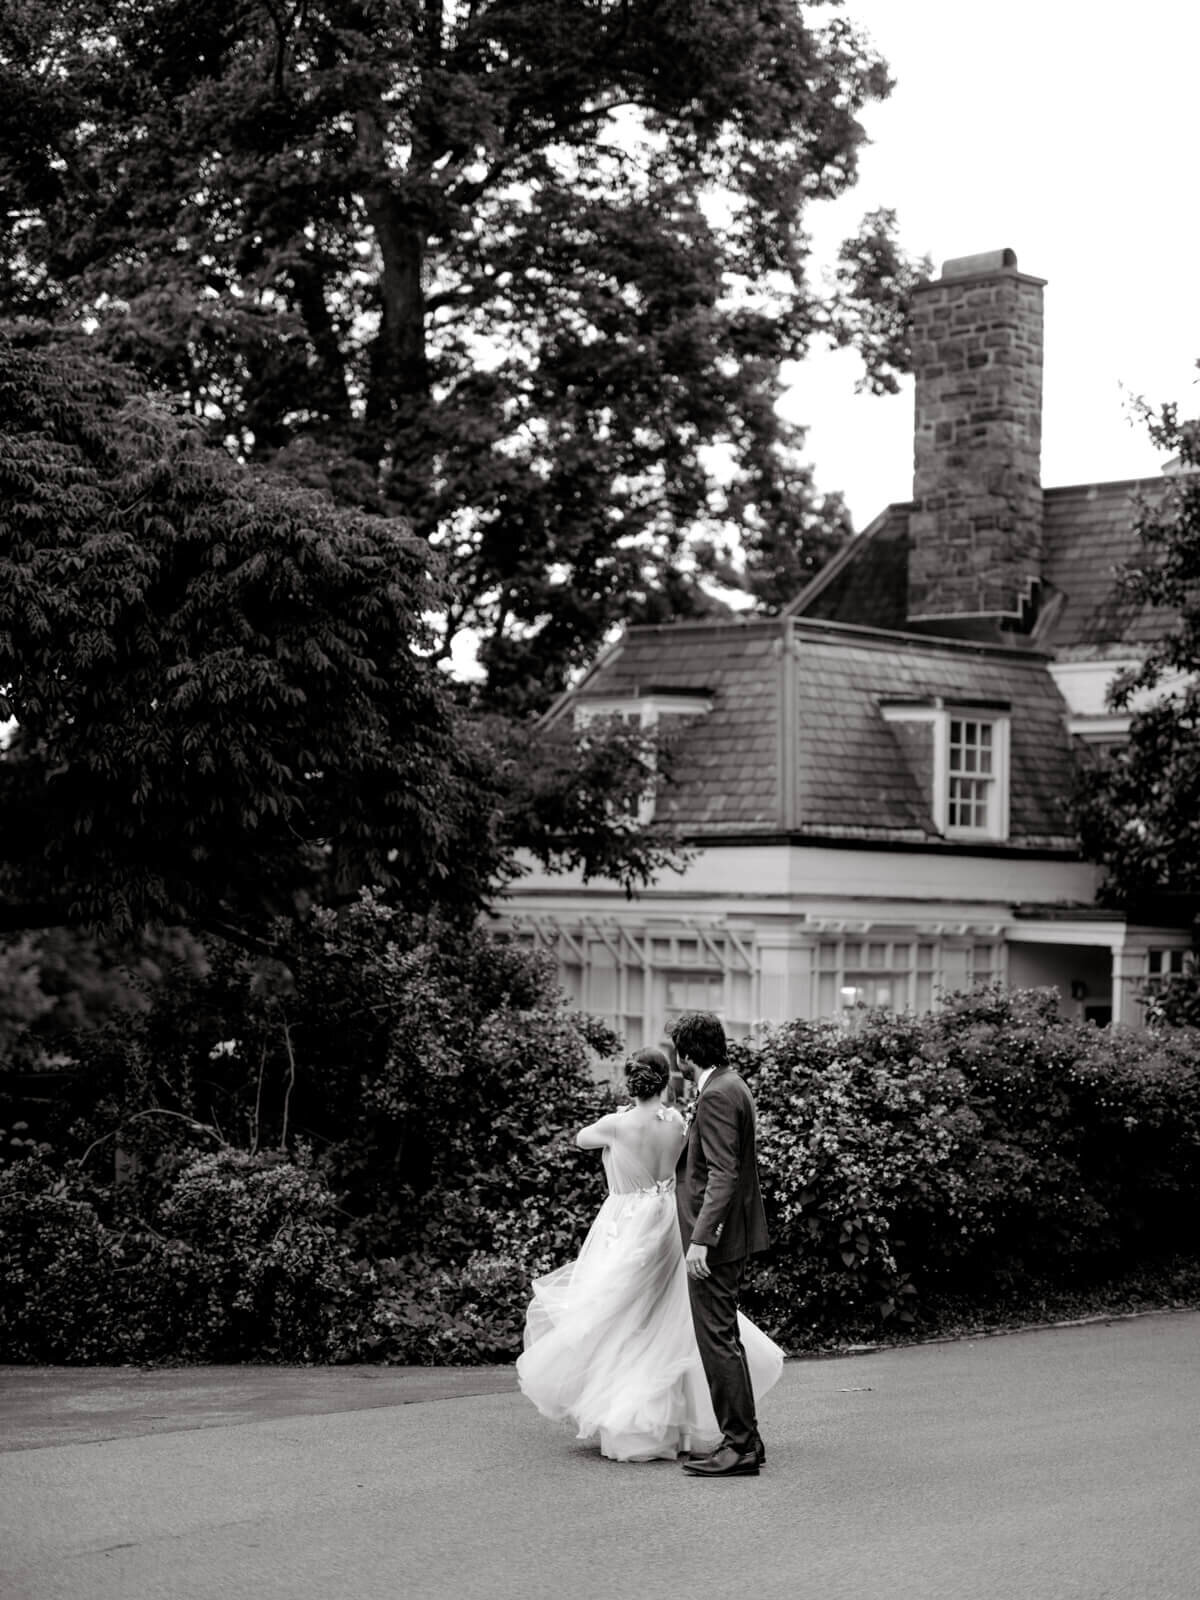 The bride and the groom are standing in front of a big house with a huge tree beside it, while their backs are turned.